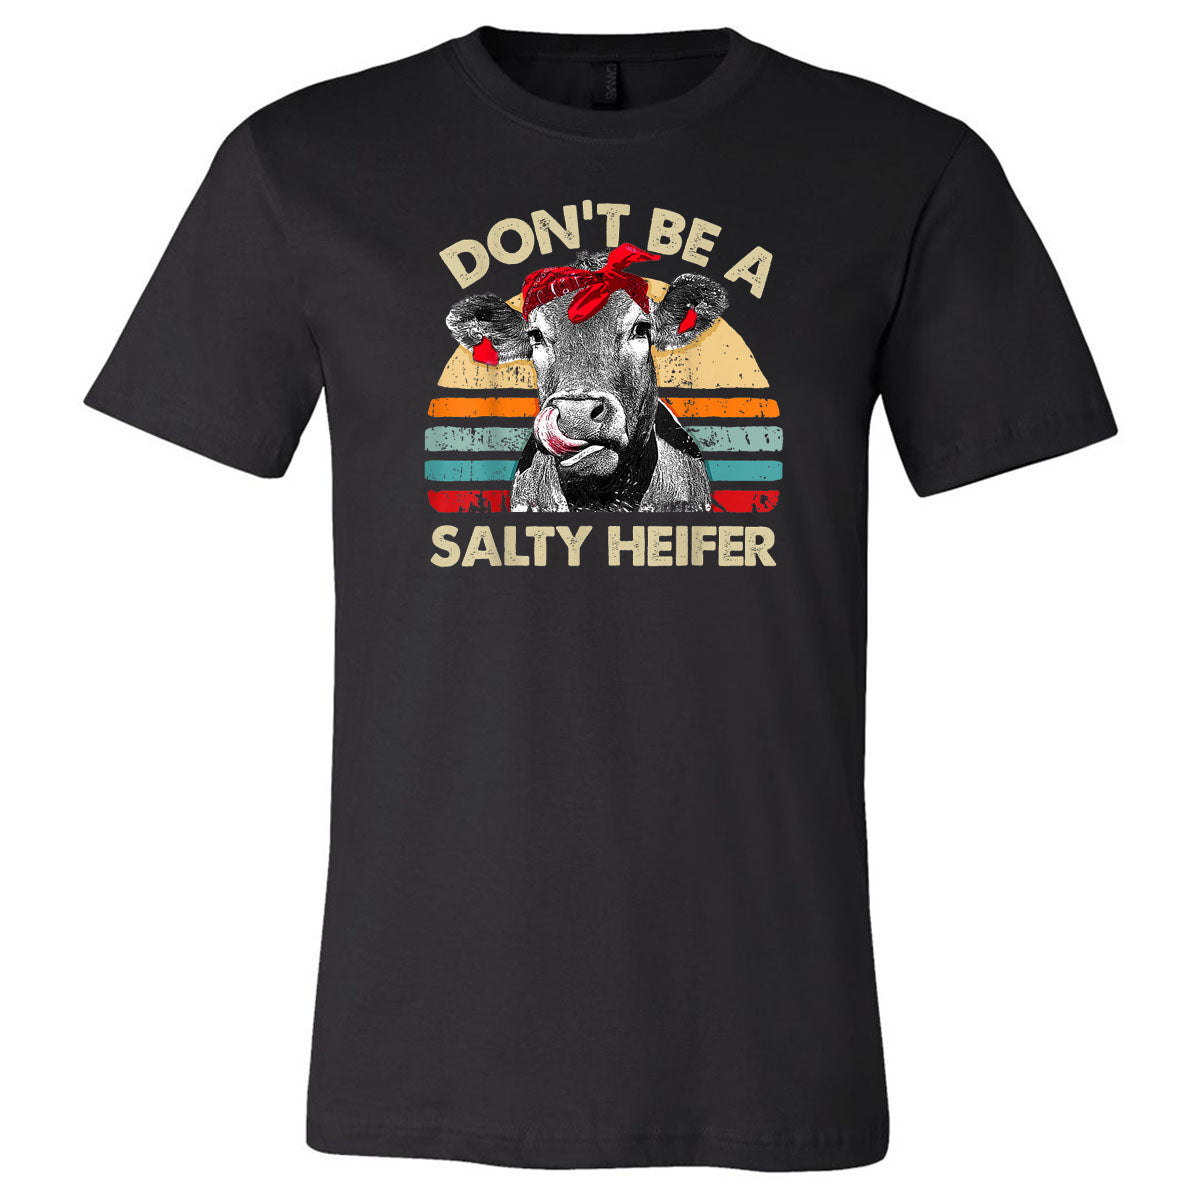 Don't Be A Salty Heifer - Black Tee - Southern Grace Creations